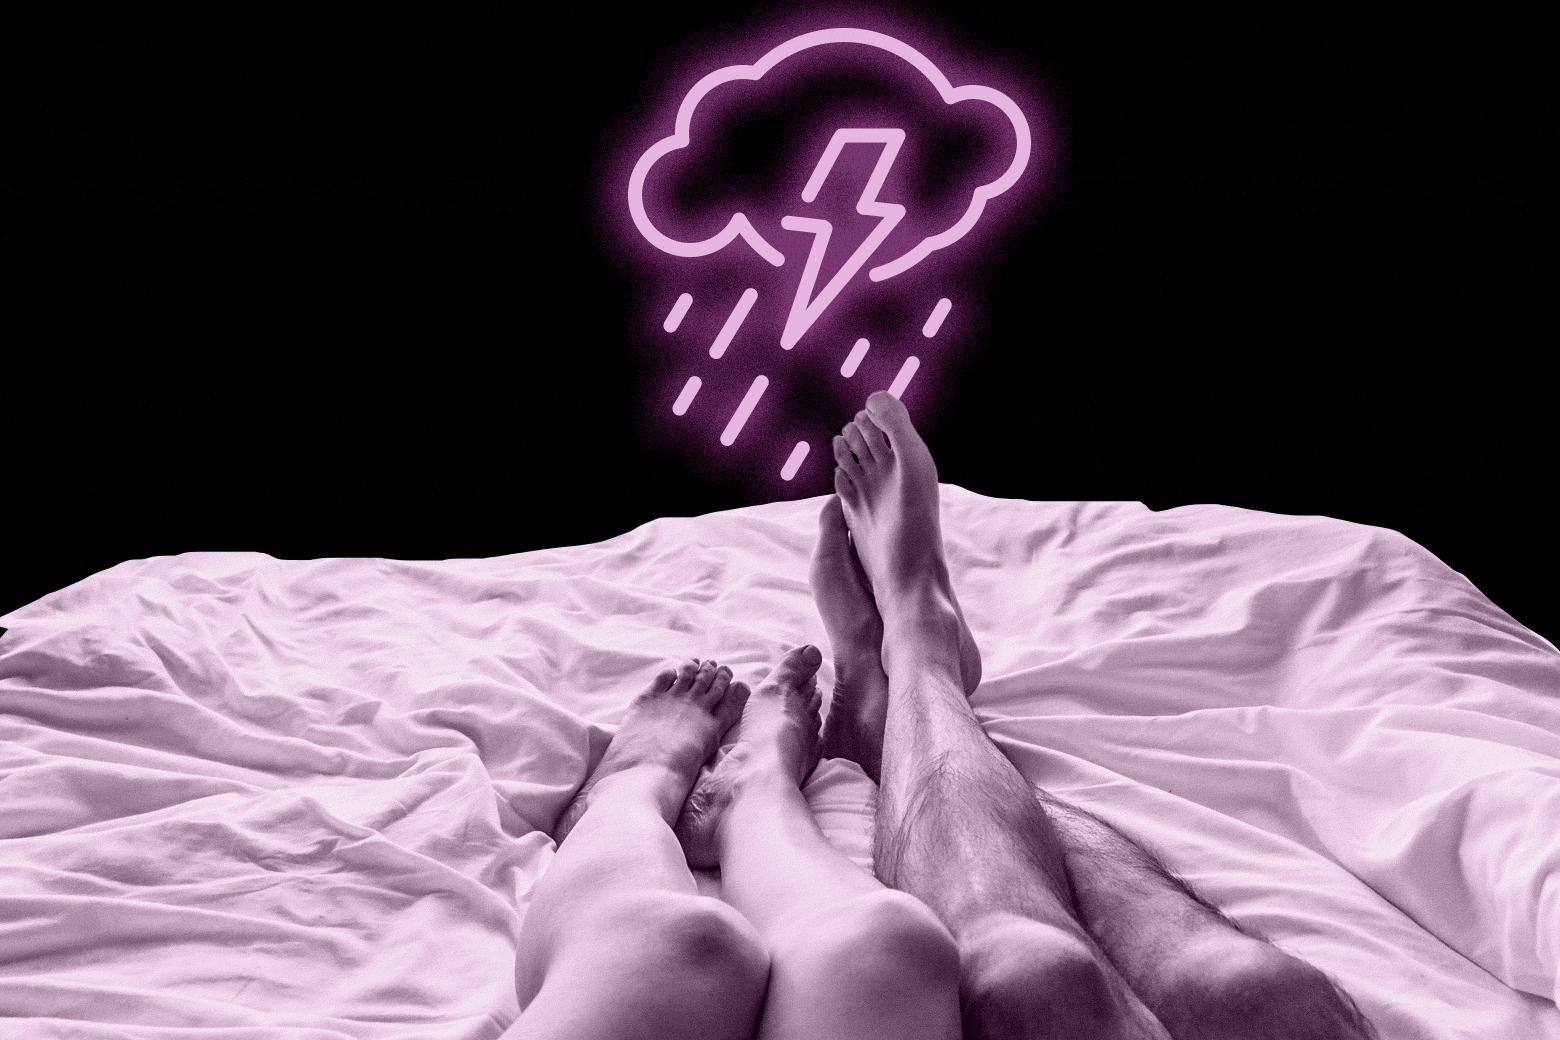 Two people in bed with a storm cloud floating in front of the bed.